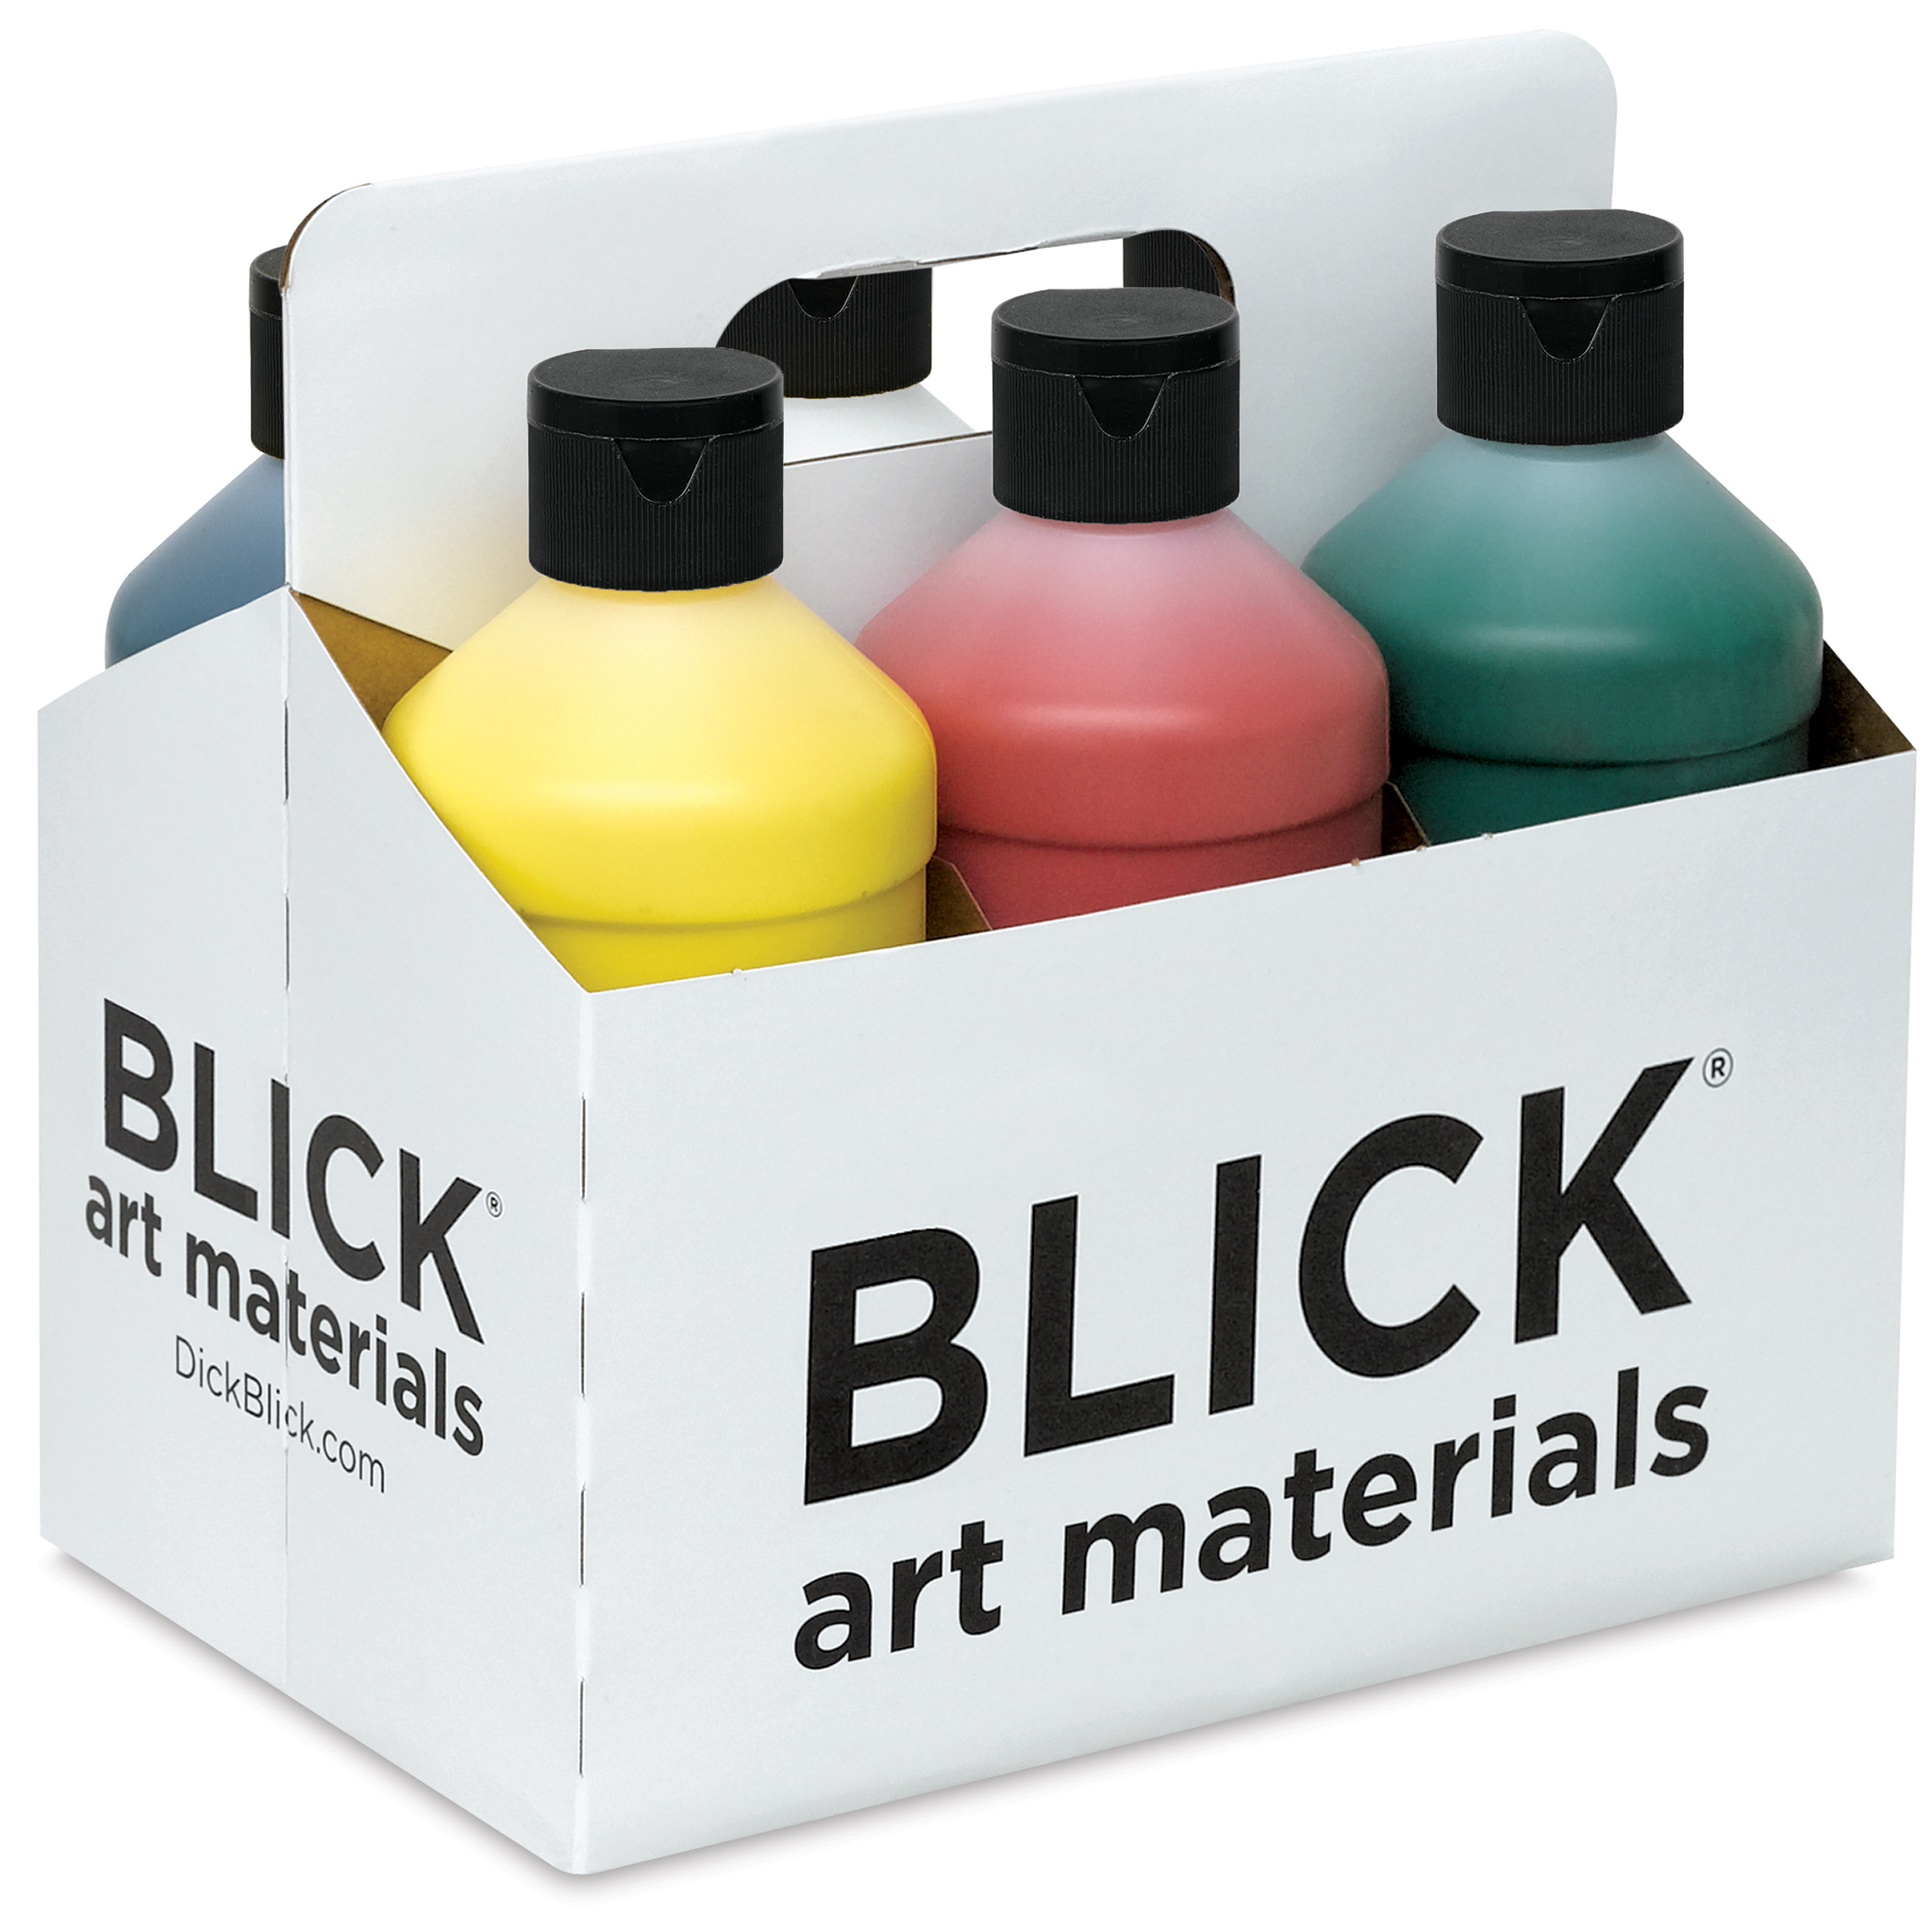 Blick Studio Acrylic Paints and Sets; Brand new for Sale in